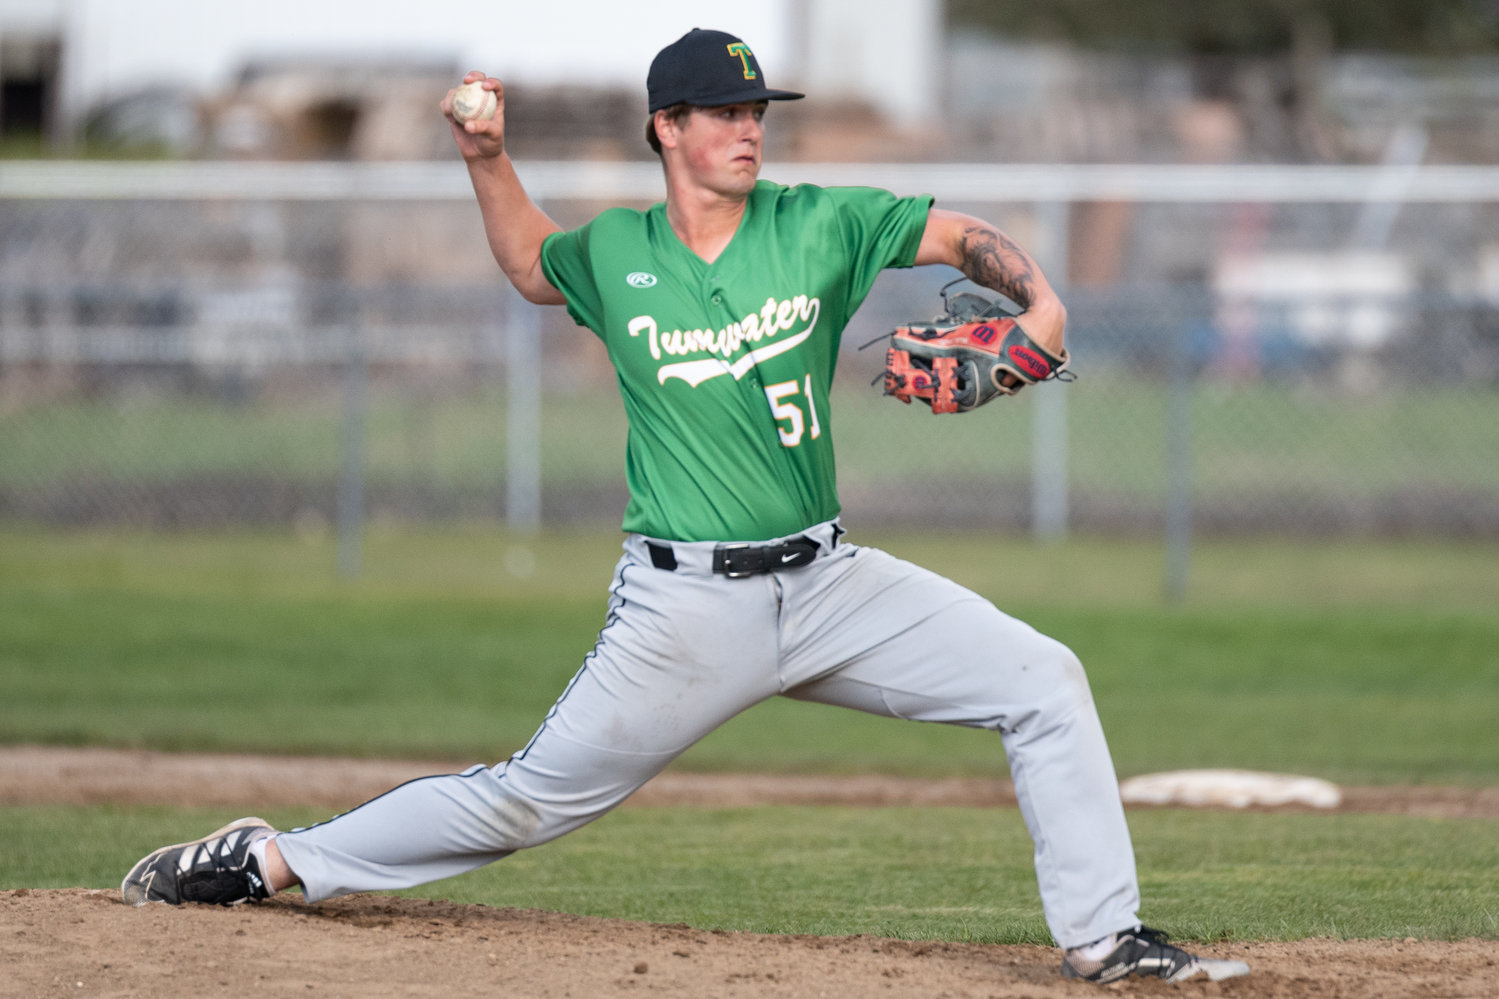 Tumwater pitcher Blake Smith winds up to deliver a pitch out of the bullpen against Rochester April 27.